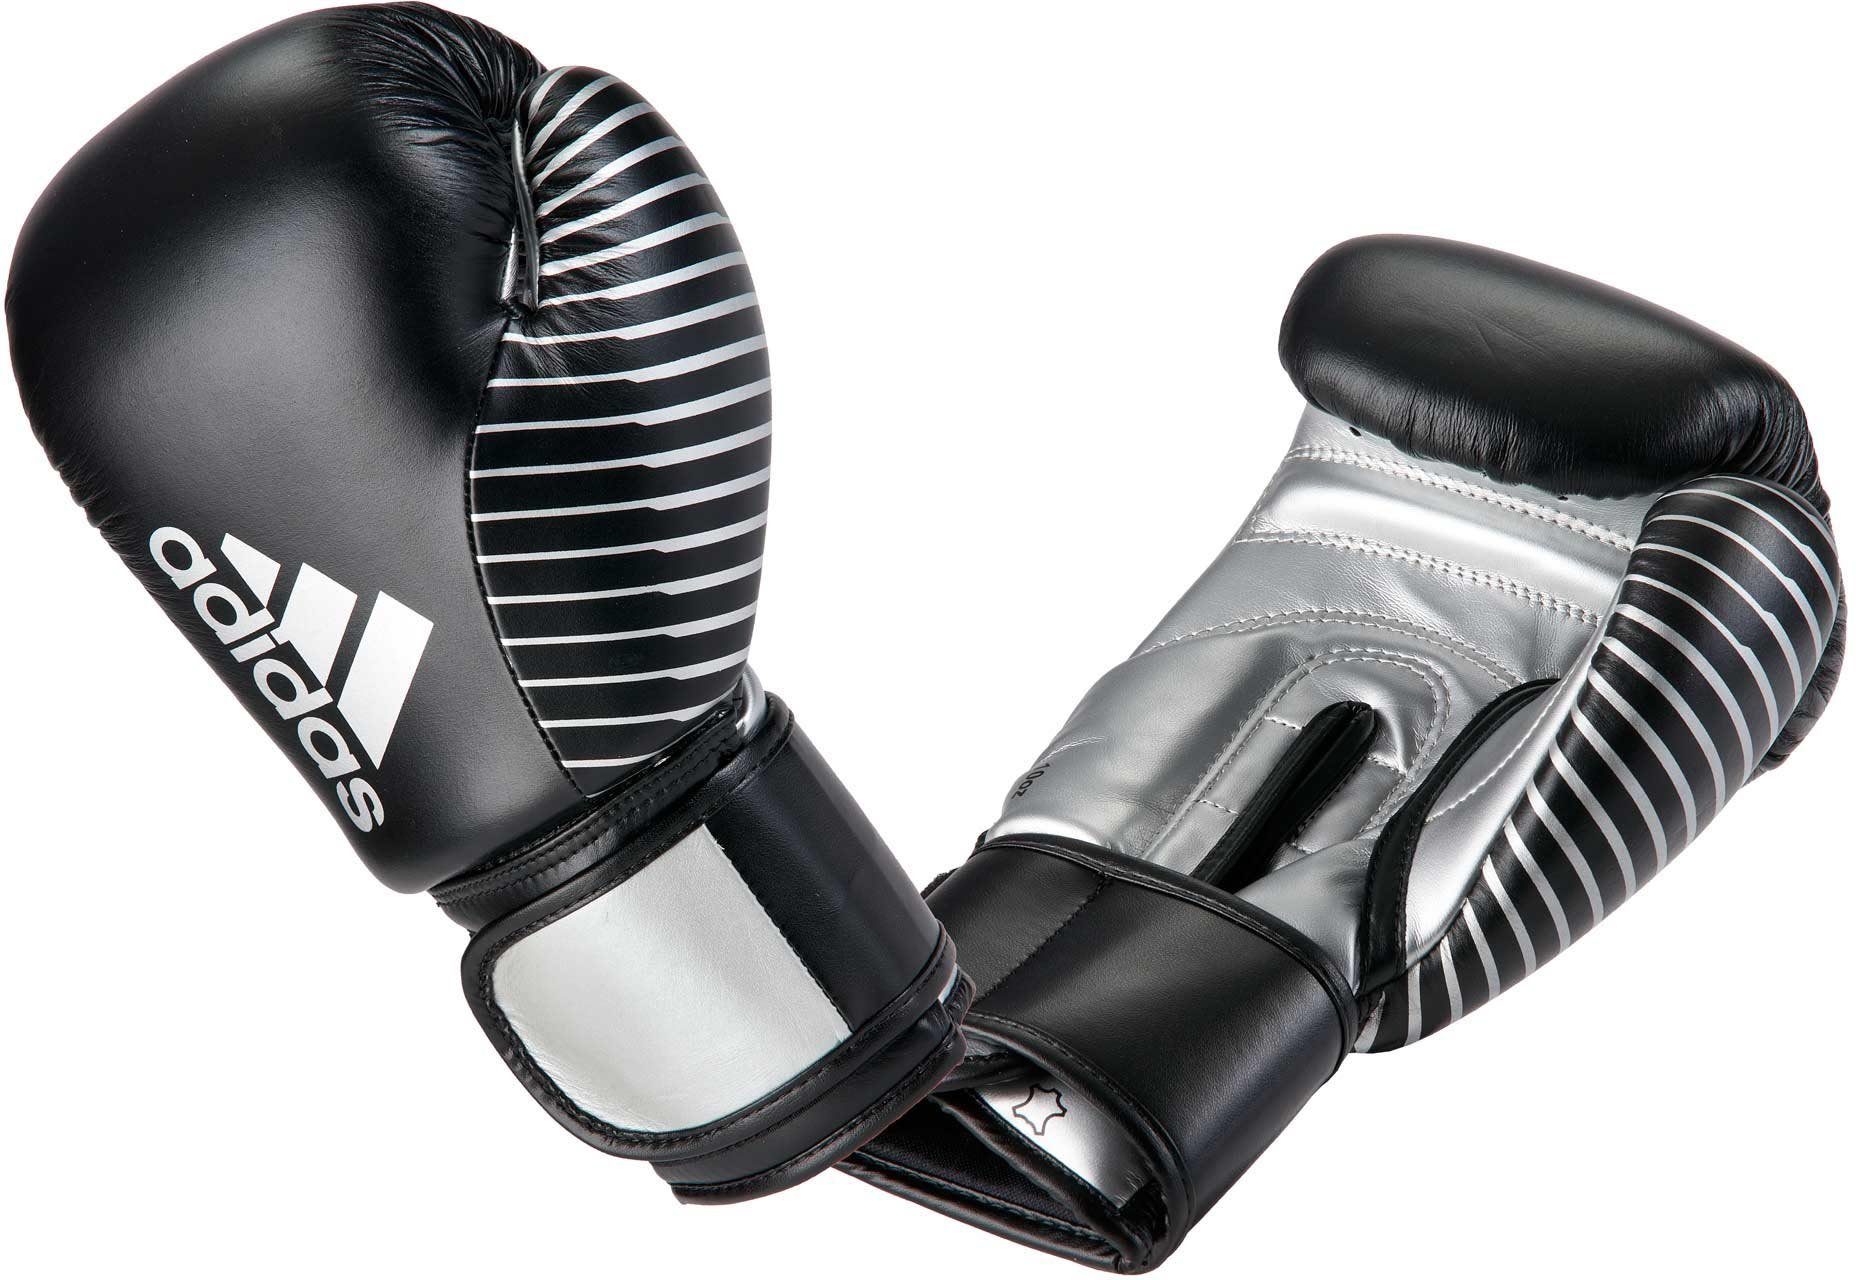 Performance black/silver Handschuh adidas Competition Boxhandschuhe